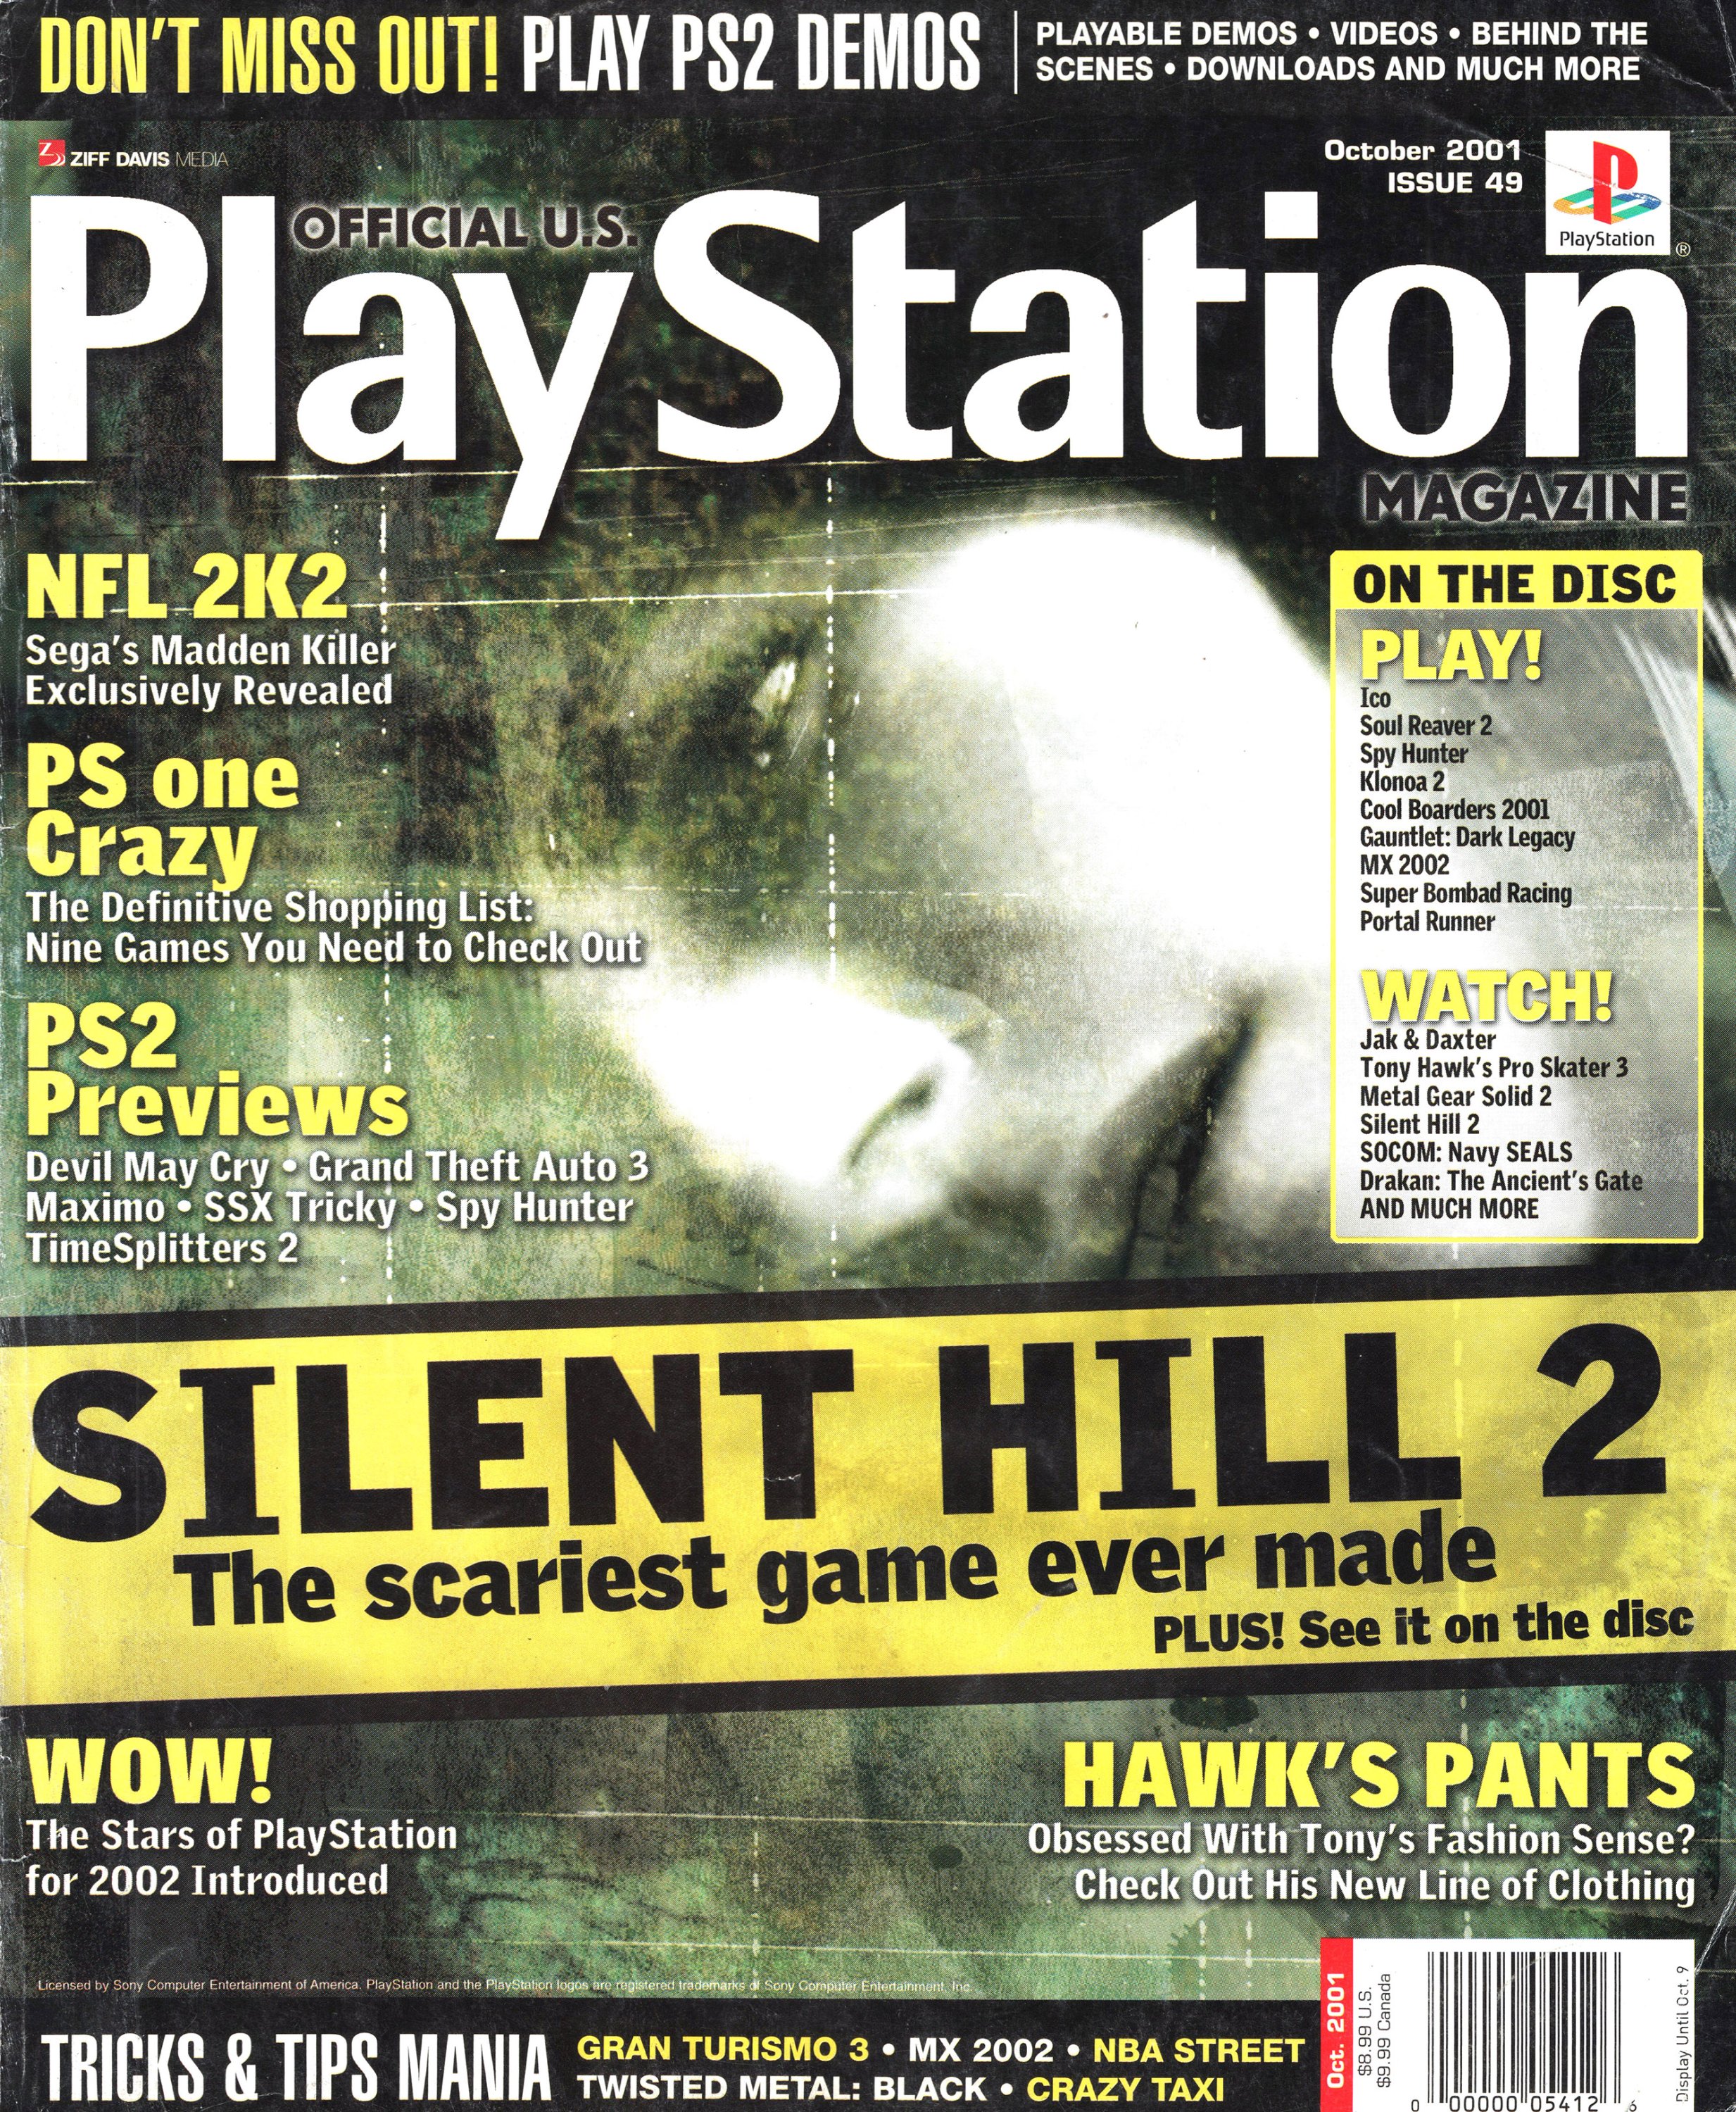 New SONY OFFICIAL US PLAYSTATION MAGAZINE PS2 DEMO DISC 104 : Free